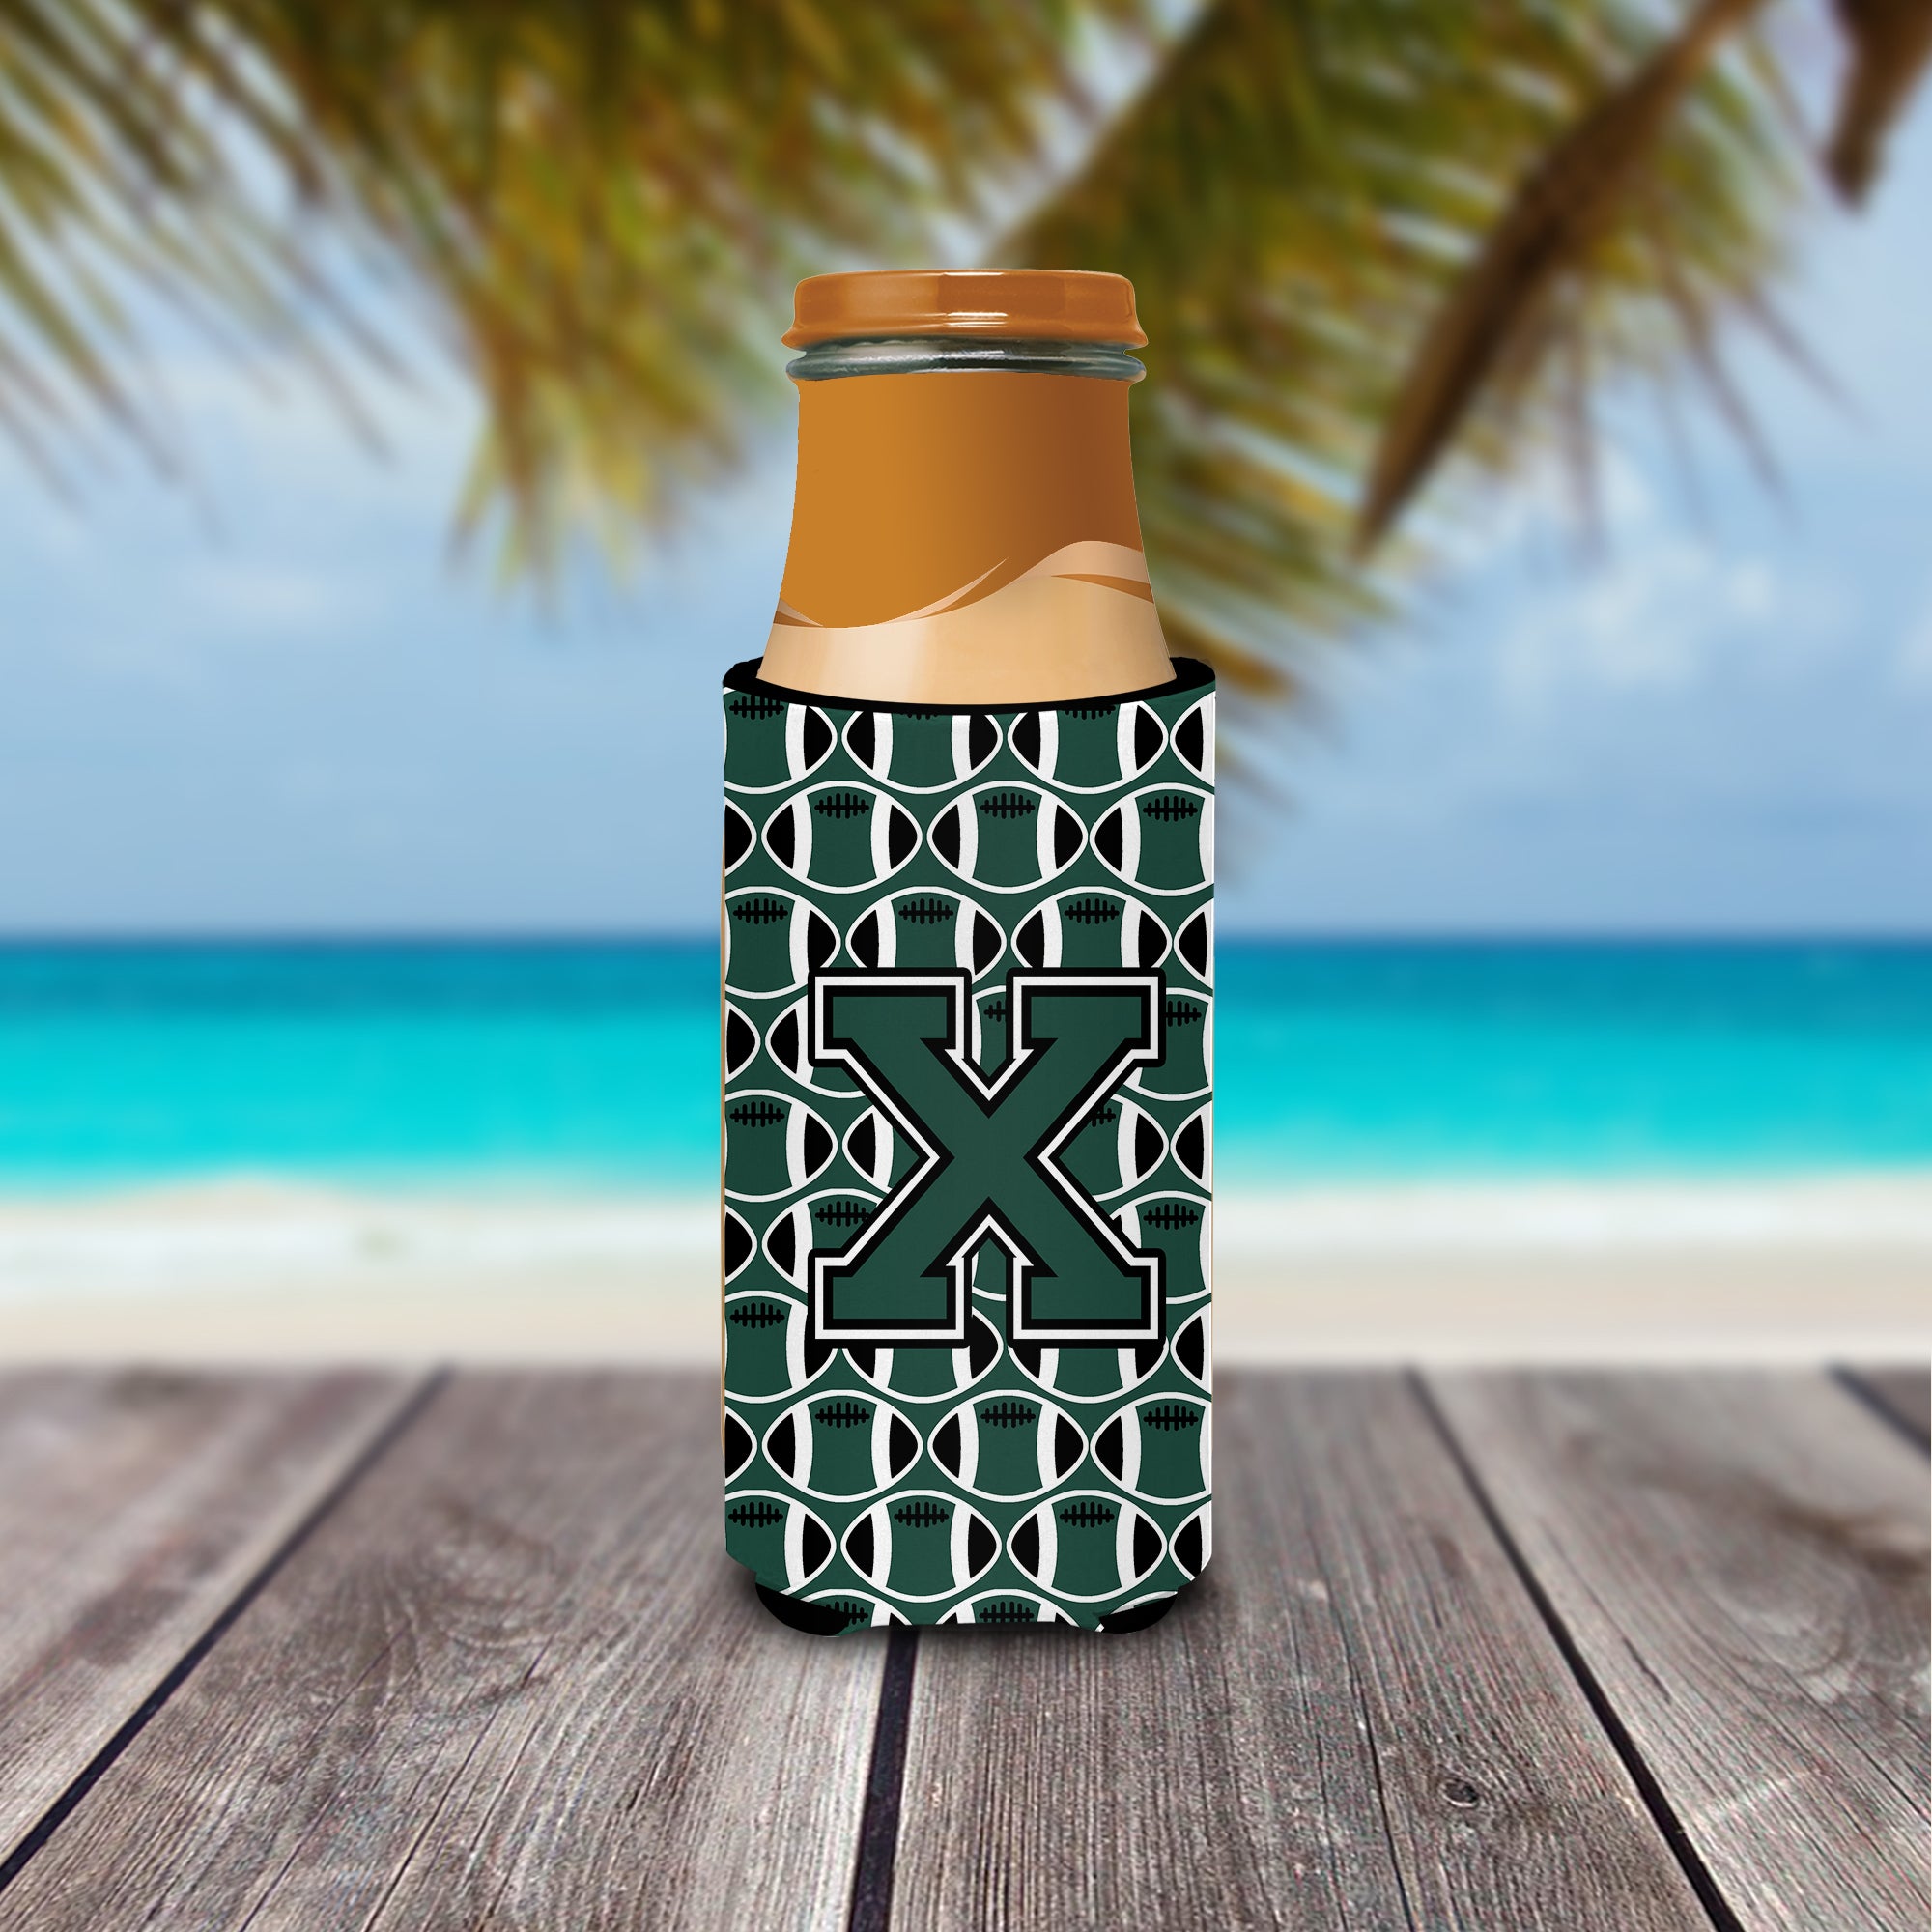 Letter X Football Green and White Ultra Beverage Insulators for slim cans CJ1071-XMUK.